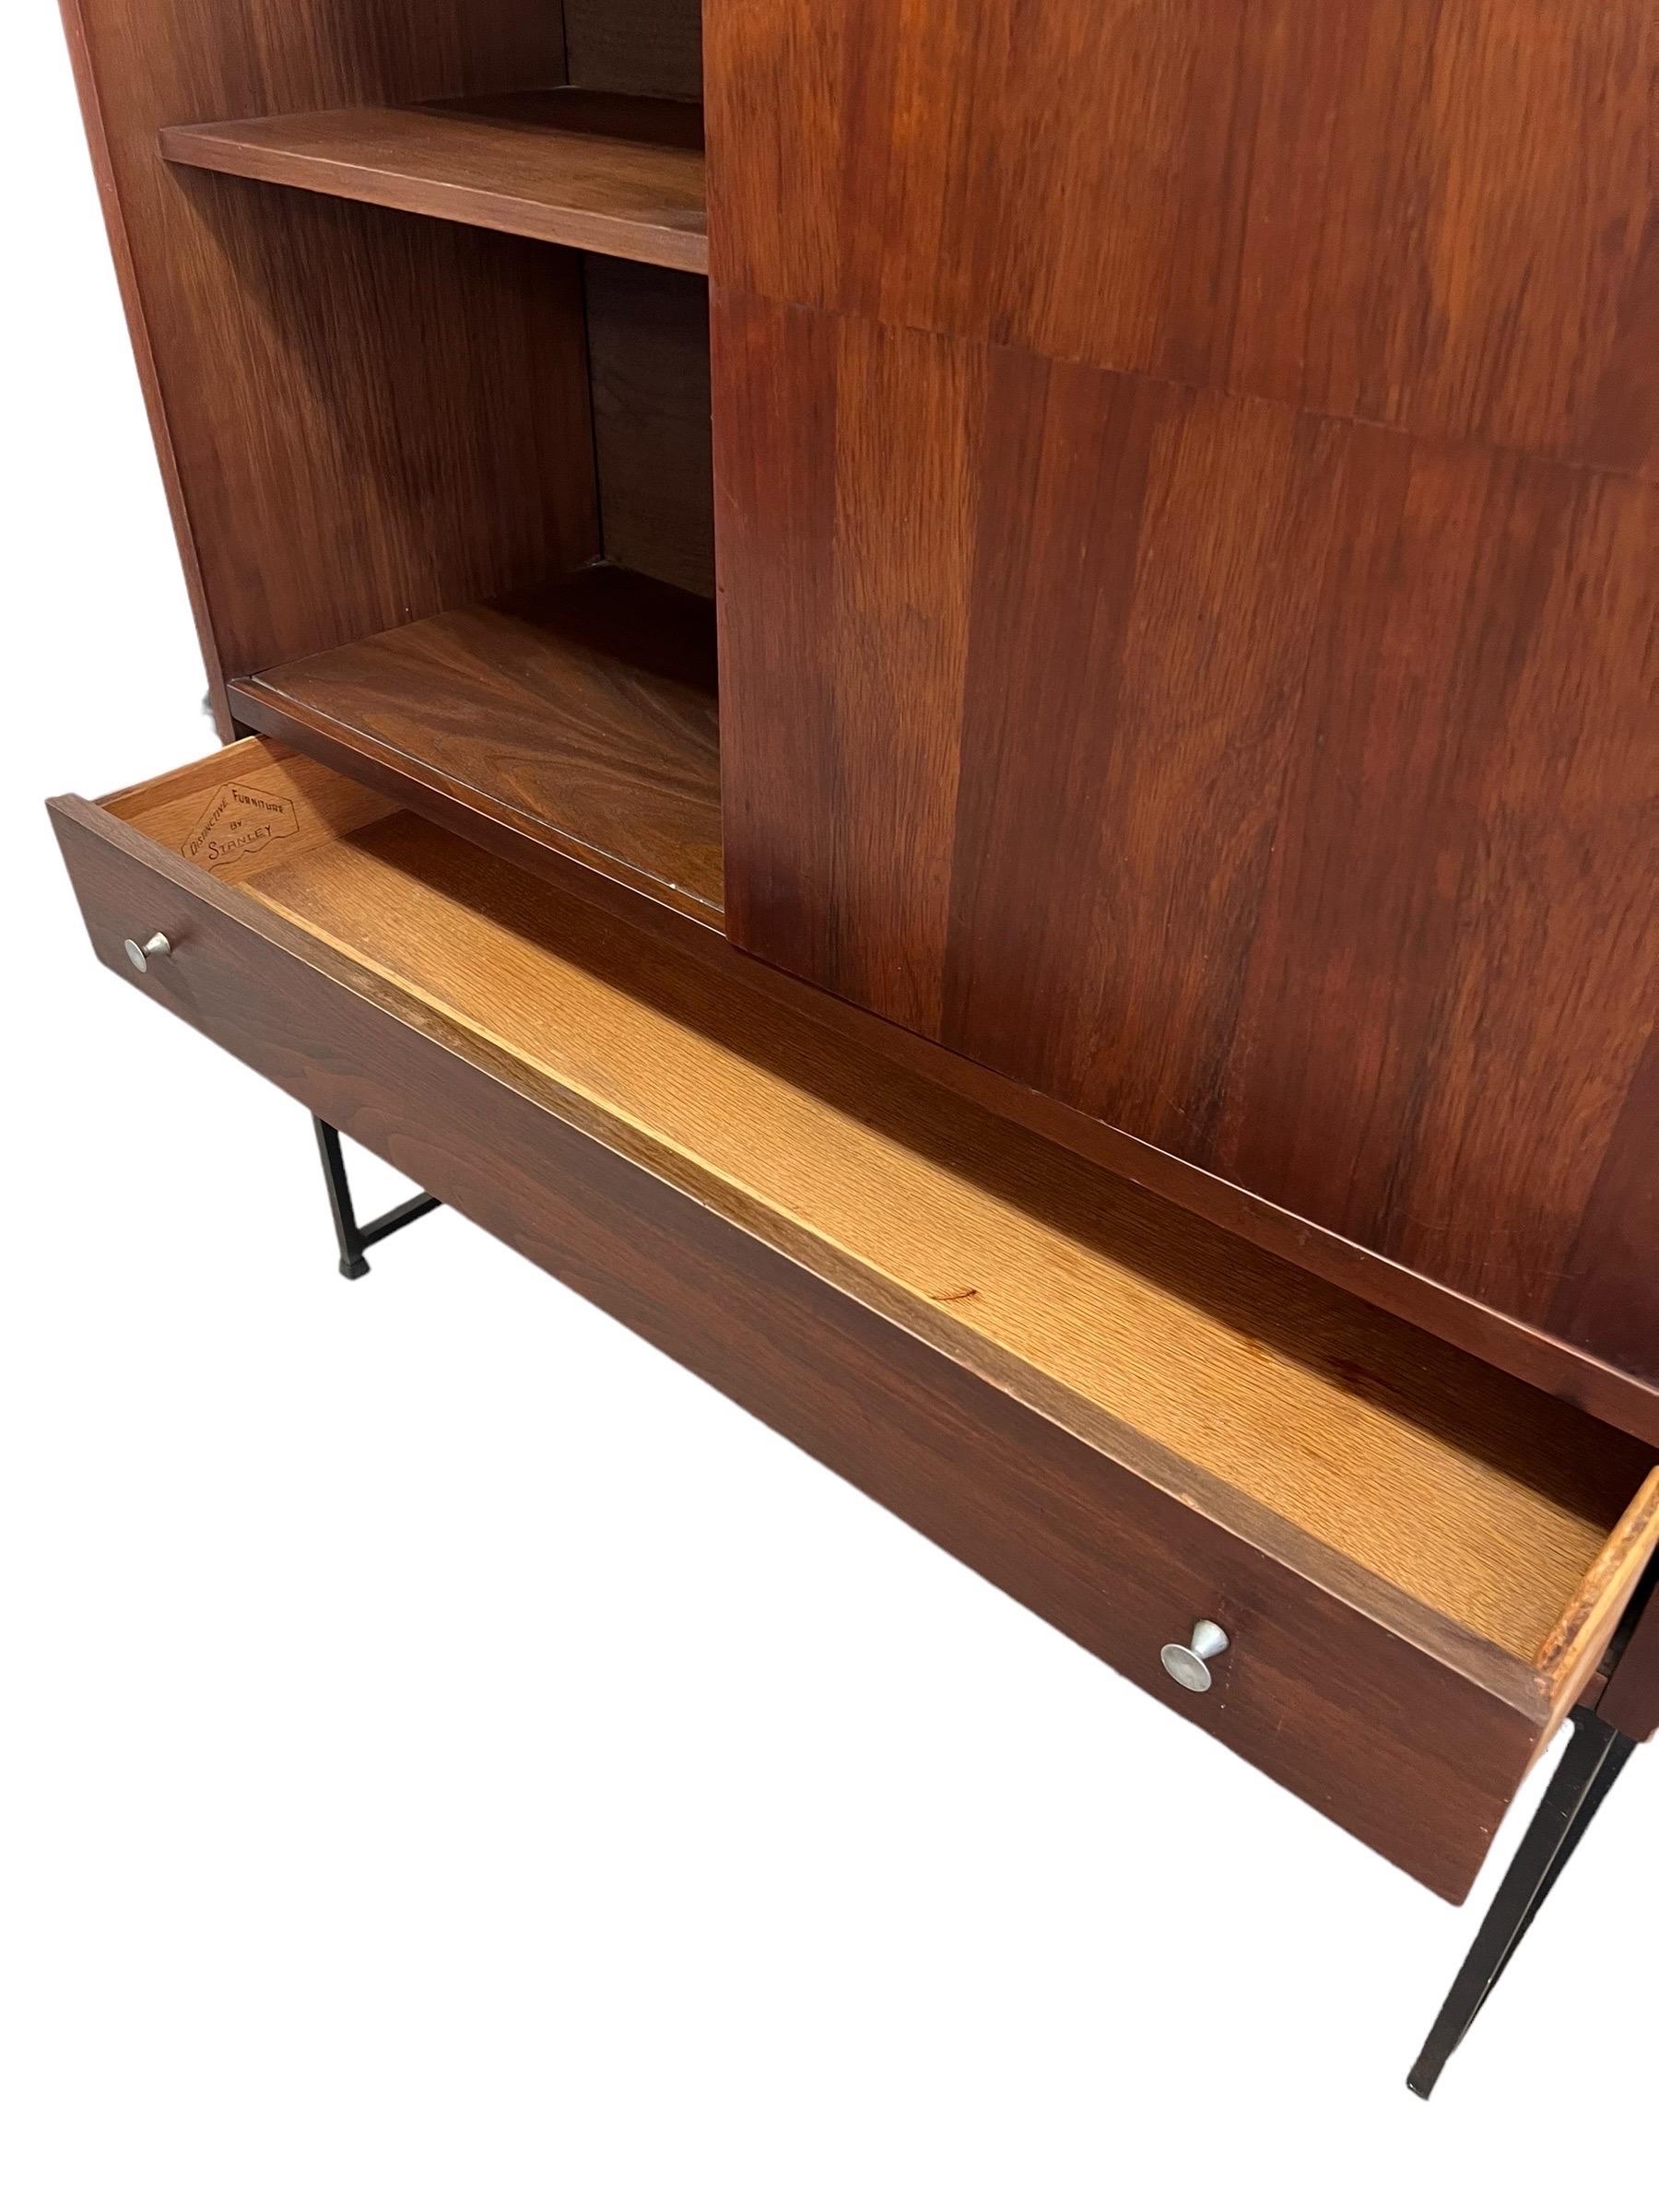 Walnut Vintage Mid Century Modern Bookshelf With Sliding Door and Dovetailed Drawers For Sale